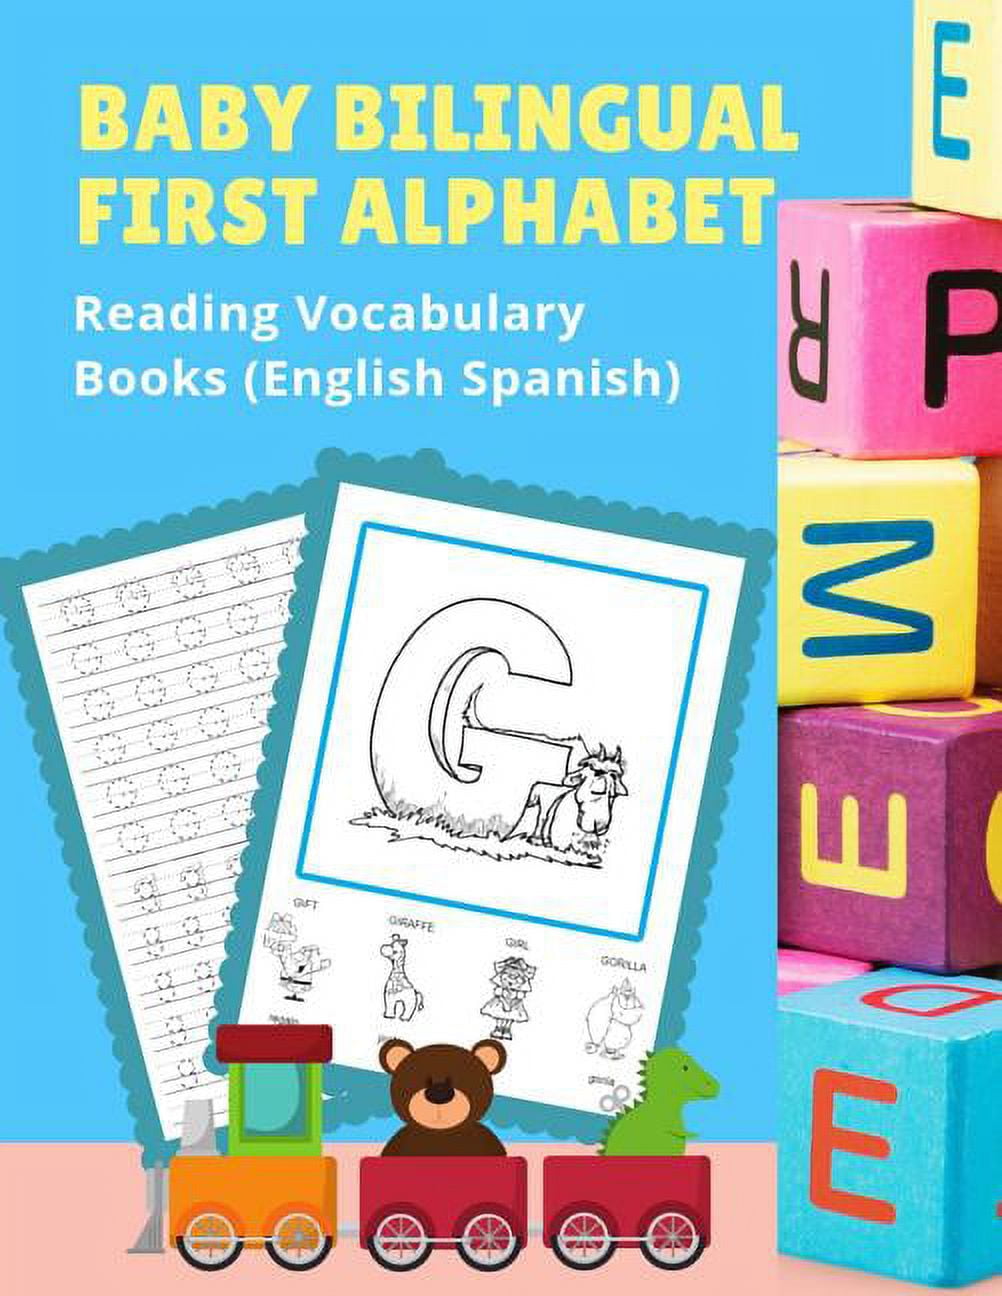 English-Japanese Vocabulary Builder Learning Books for Kids to Beginners JLPT N4-5: 100 First Learning Bilingual Frequency Animals Word Card Games. Full Visual Dictionary with Coloring Picture Flash Cards. Learn New Language for Preschoolers to Elementary [Book]